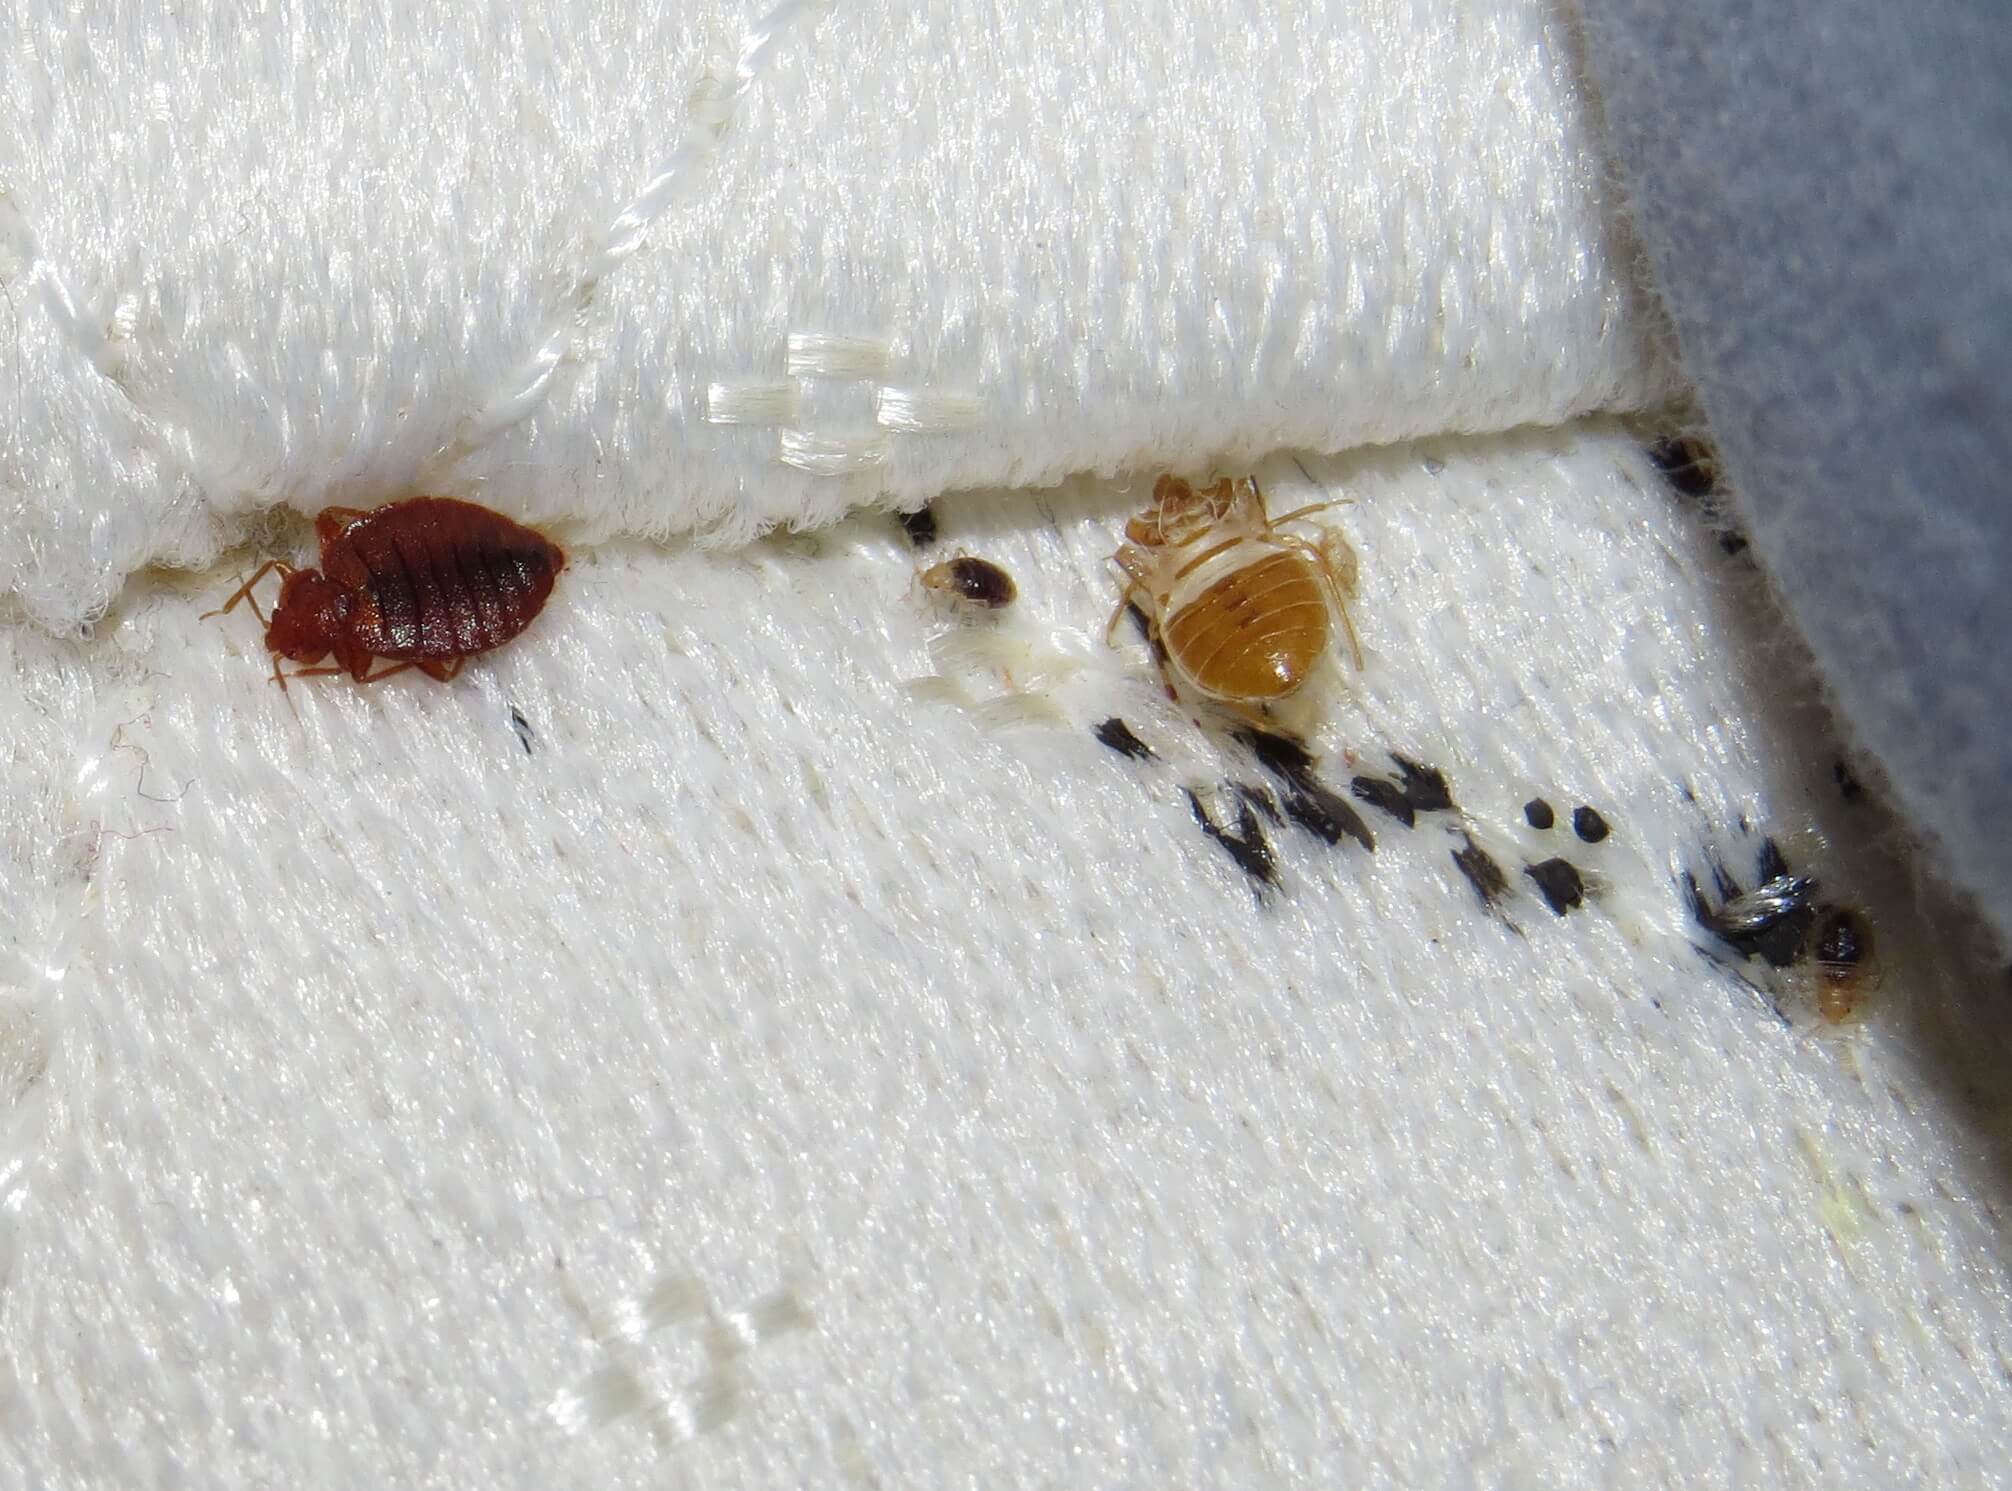 A bed bug and its shed exoskeleton.